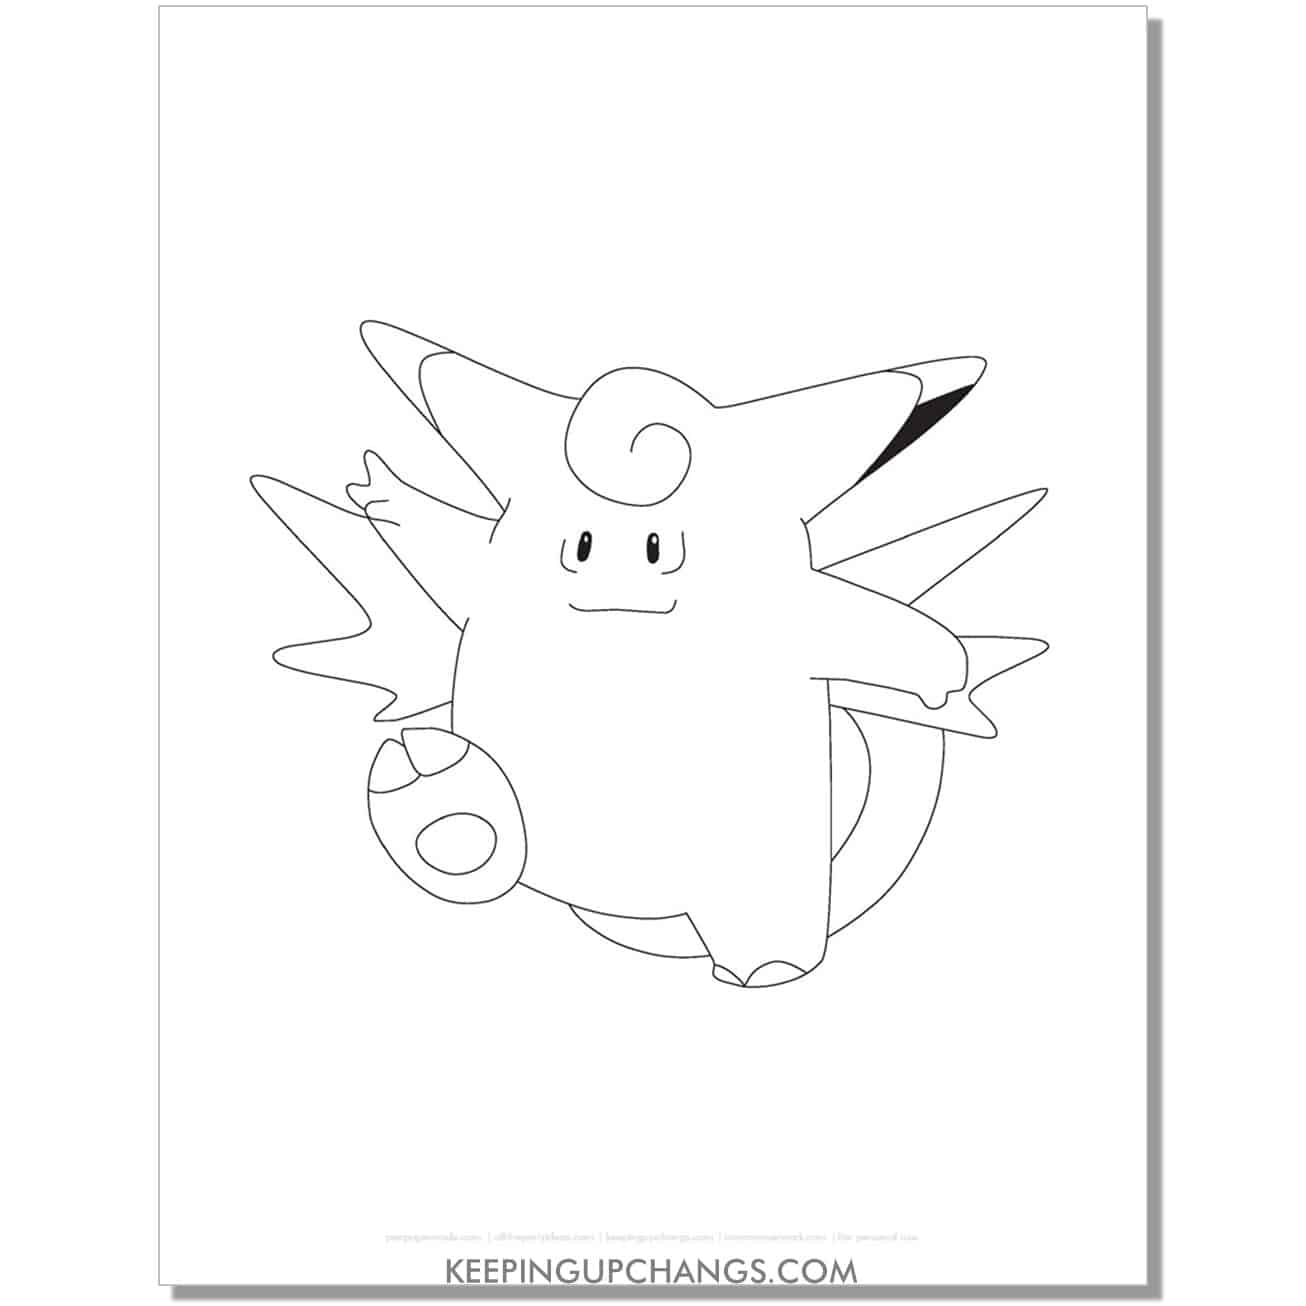 clefable pokemon coloring page, sheet.